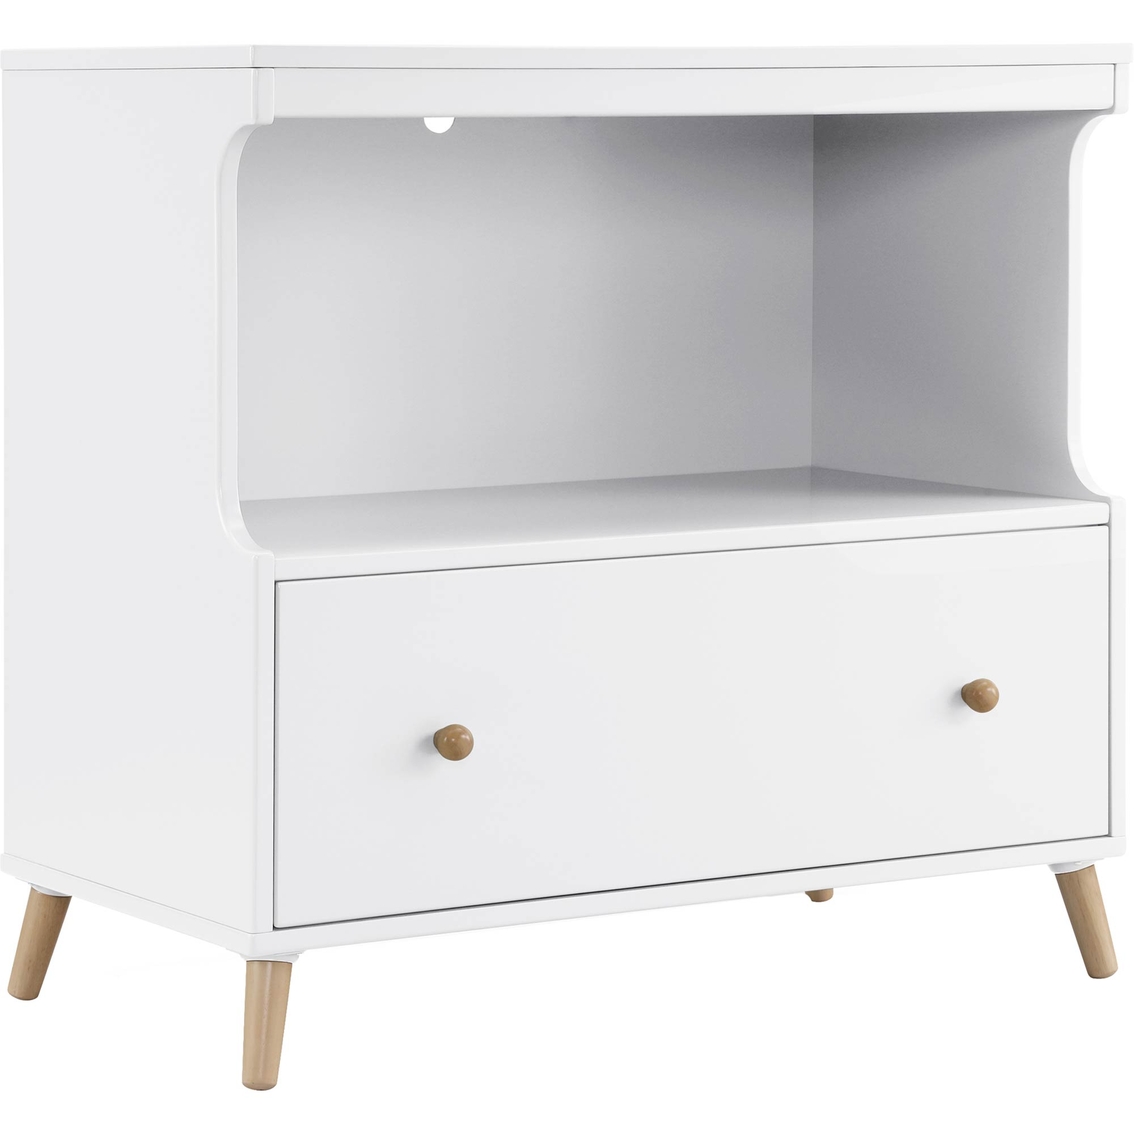 Delta Children Essex Convertible Changing Table with Drawer - Image 2 of 3